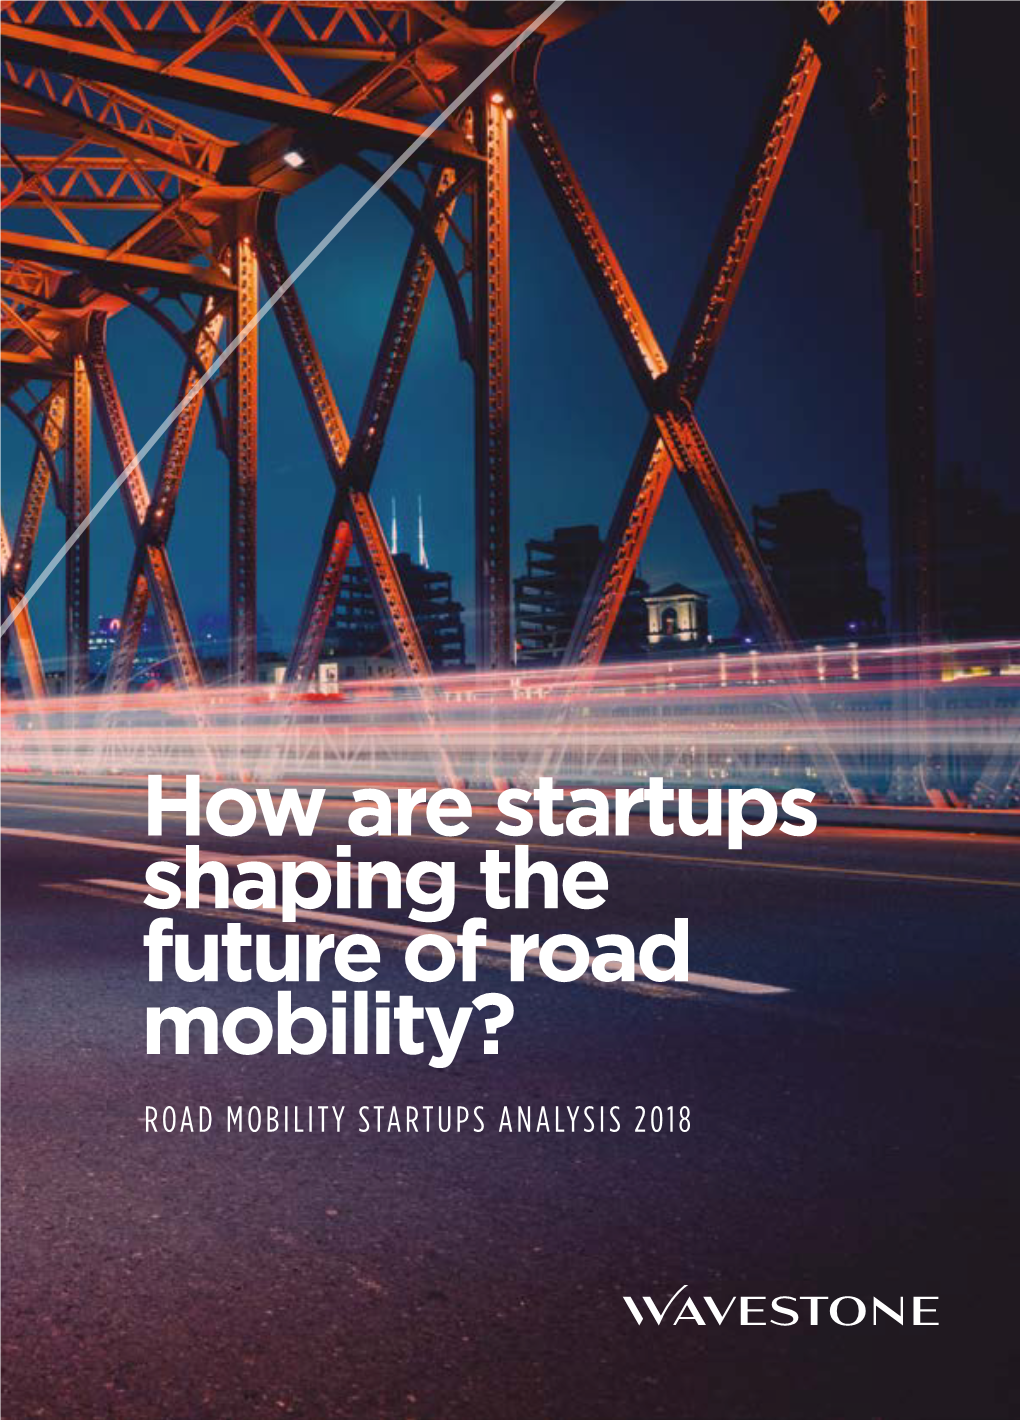 How Are Startups Shaping the Future of Road Mobility? ROAD MOBILITY STARTUPS ANALYSIS 2018